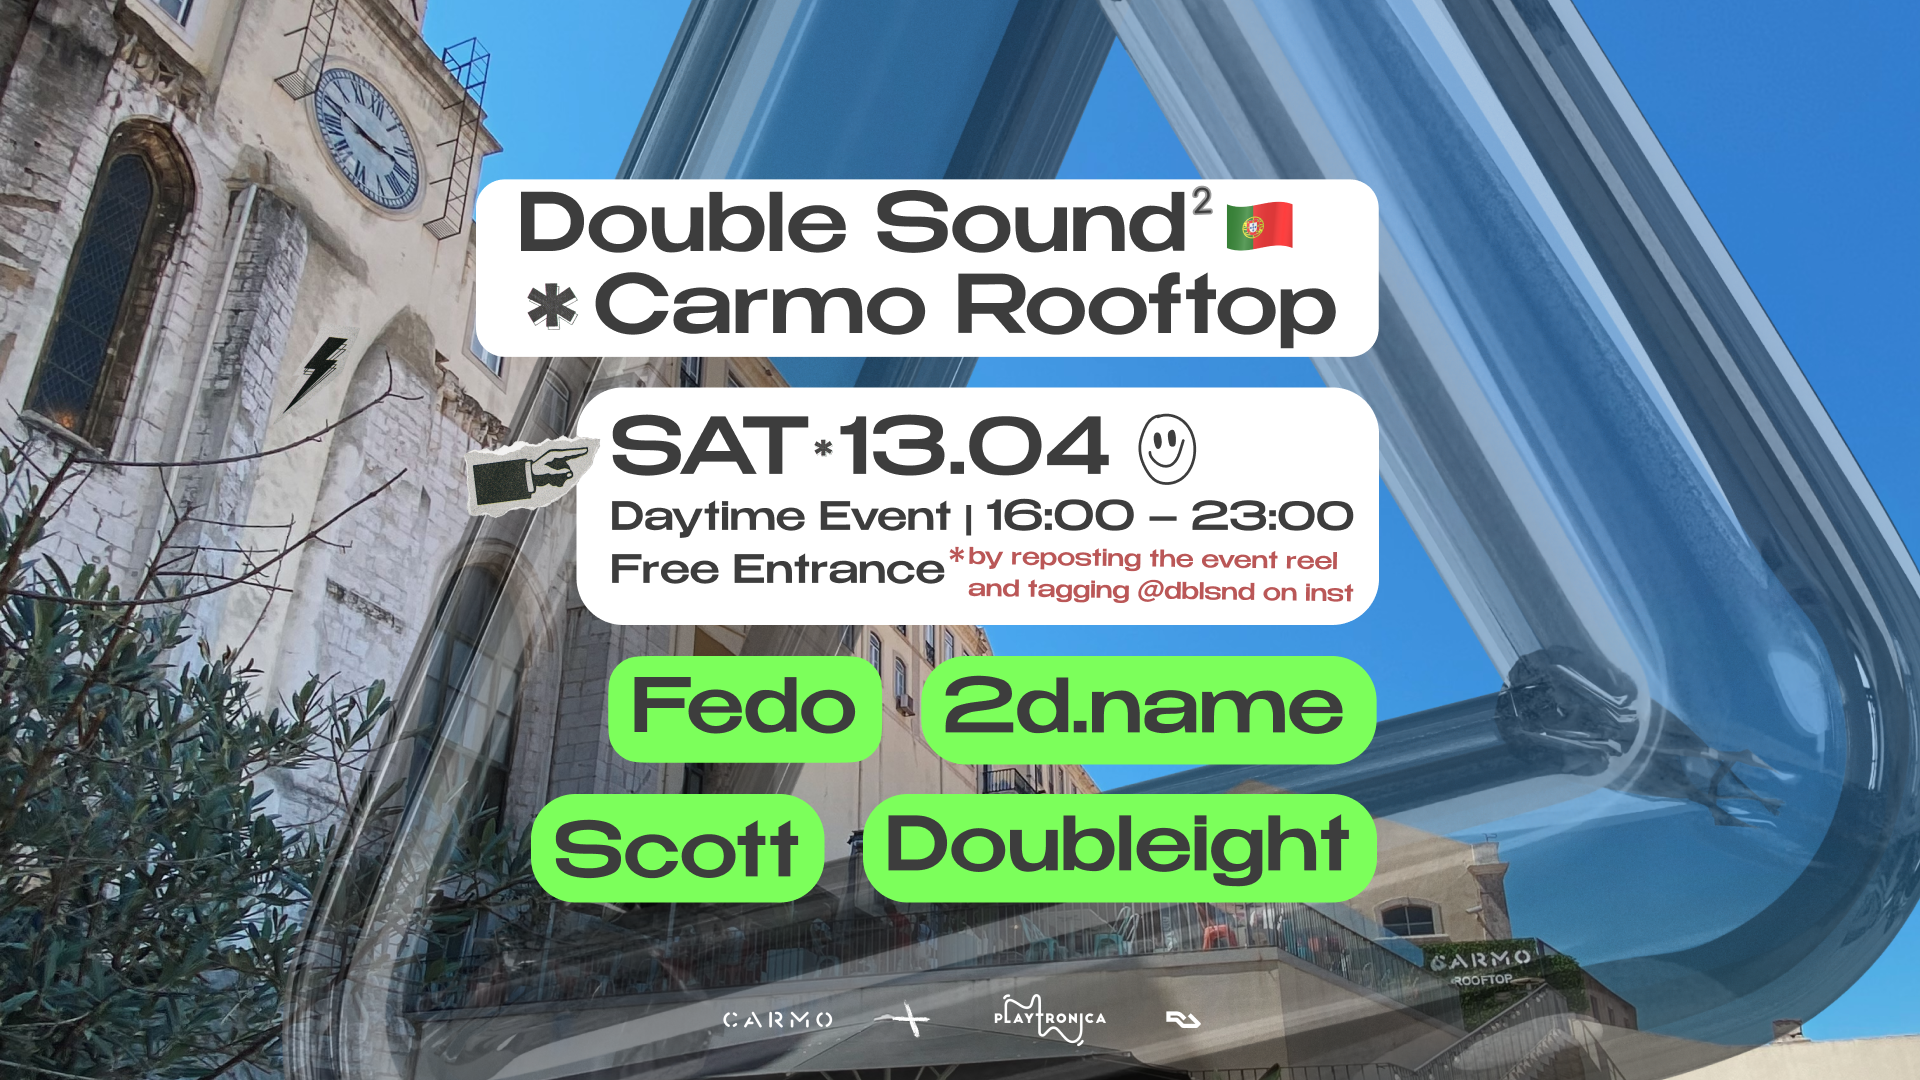 Double Sound² x Carmo Rooftop - Página frontal